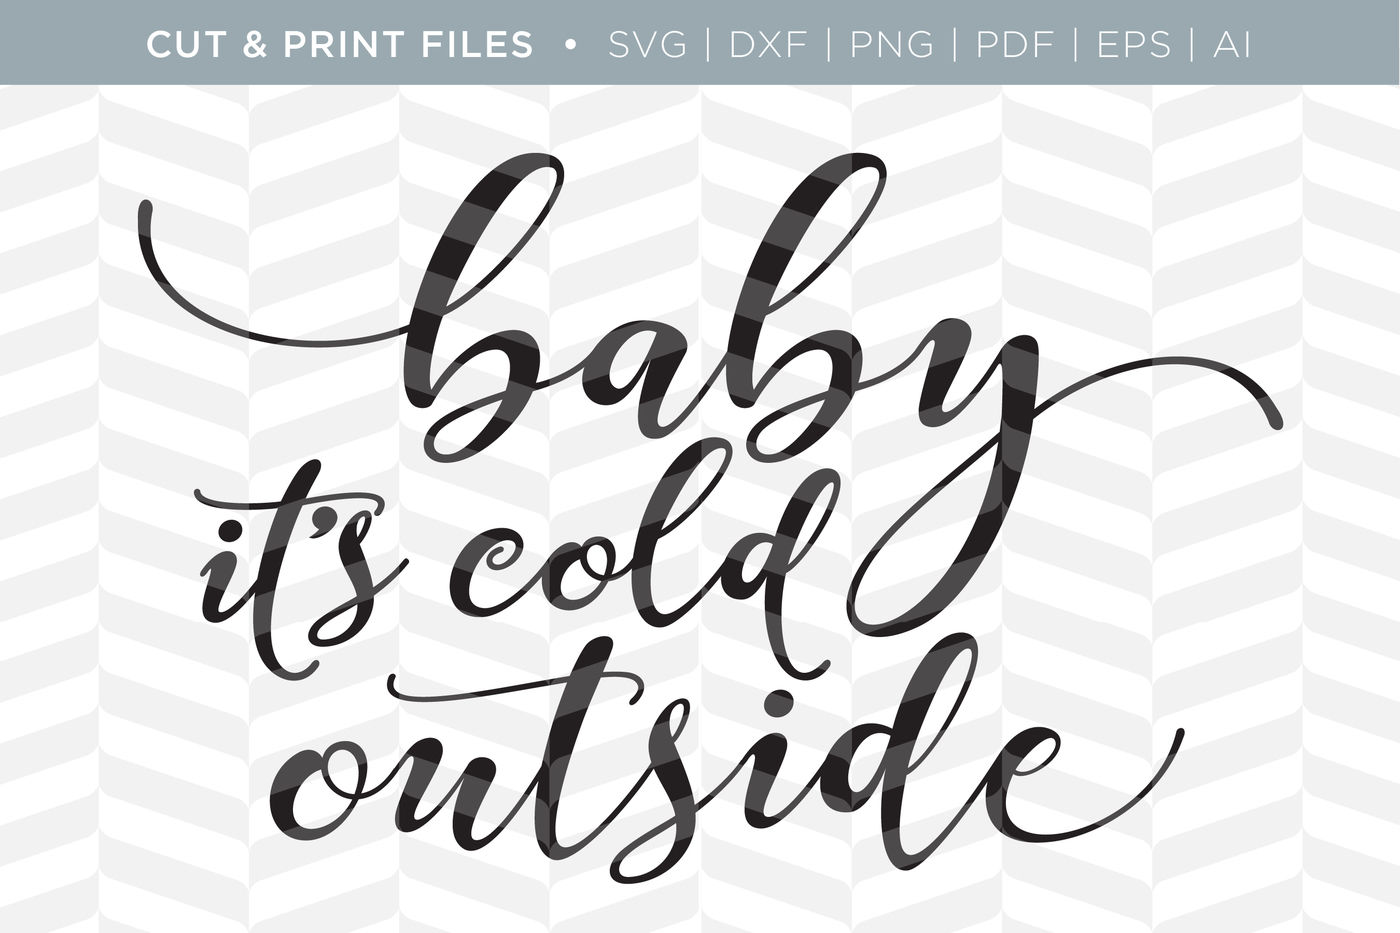 Baby it's Cold Outside - DXF/SVG/PNG/PDF Cut & Print Files ...